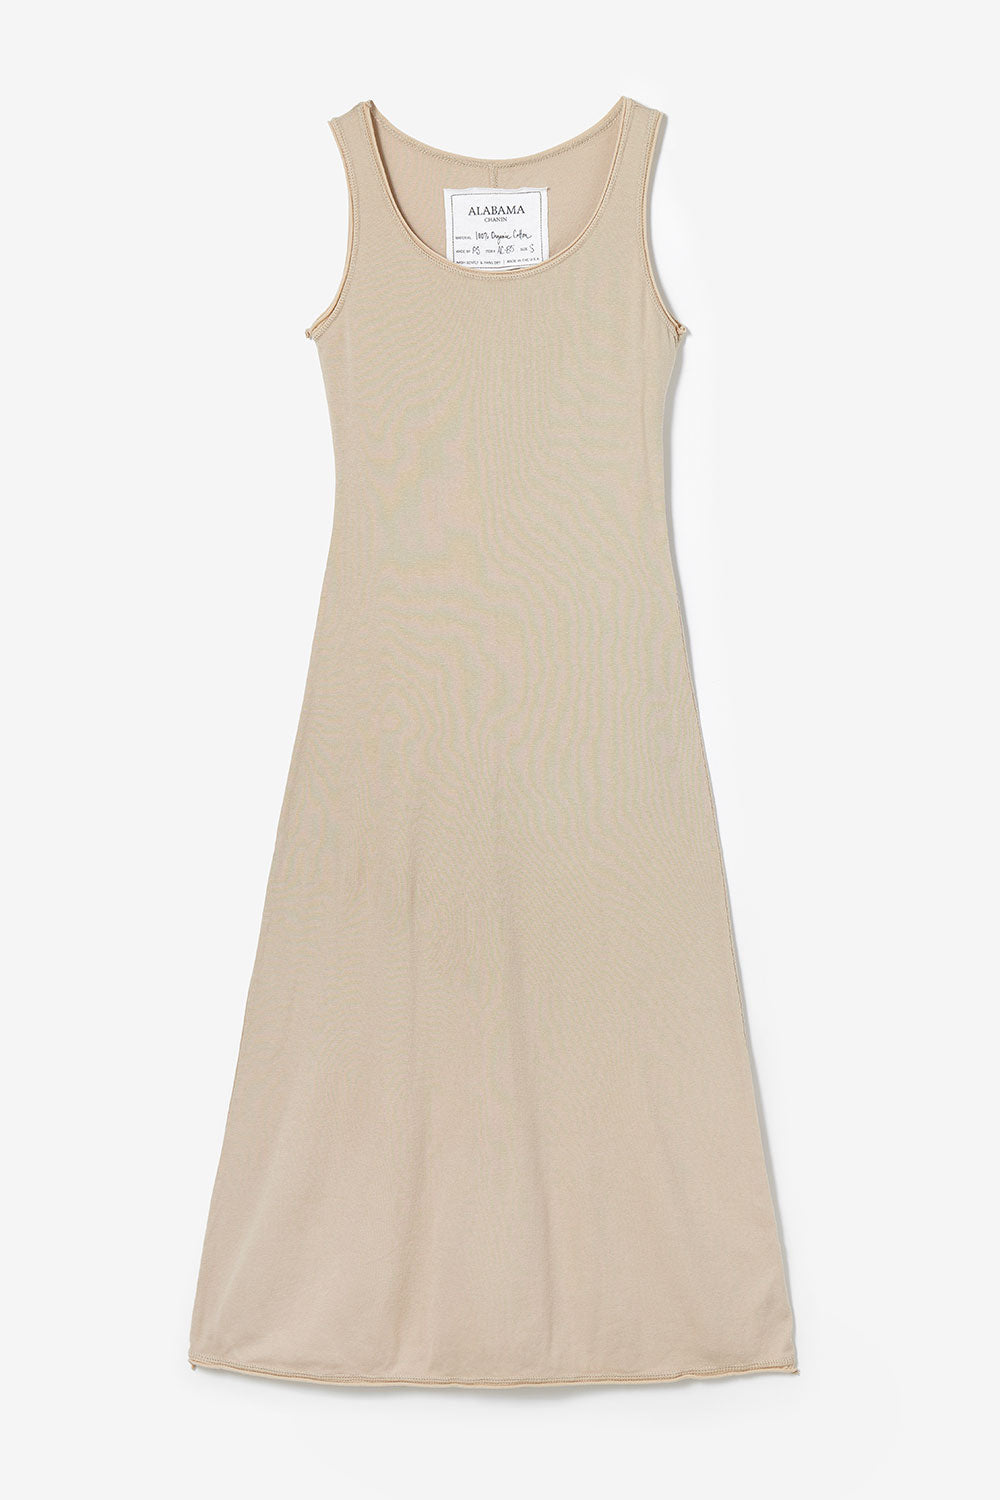 Alabama Chanin The Slip Dress Women's Slip Dress with Rounded Neck in Tan